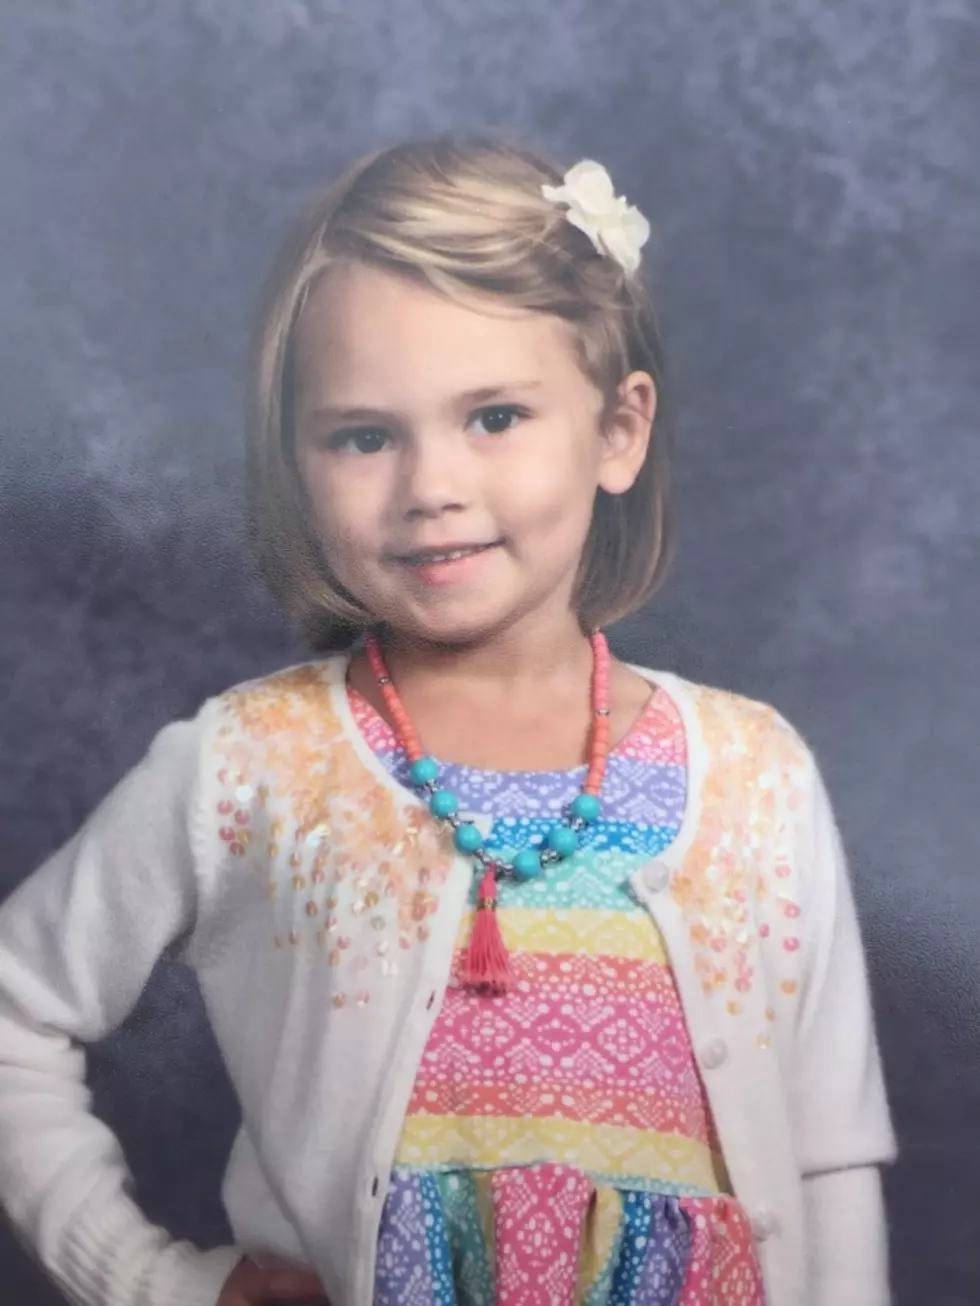 UPDATE: Body of Missing 5-Year-Old Girl Found